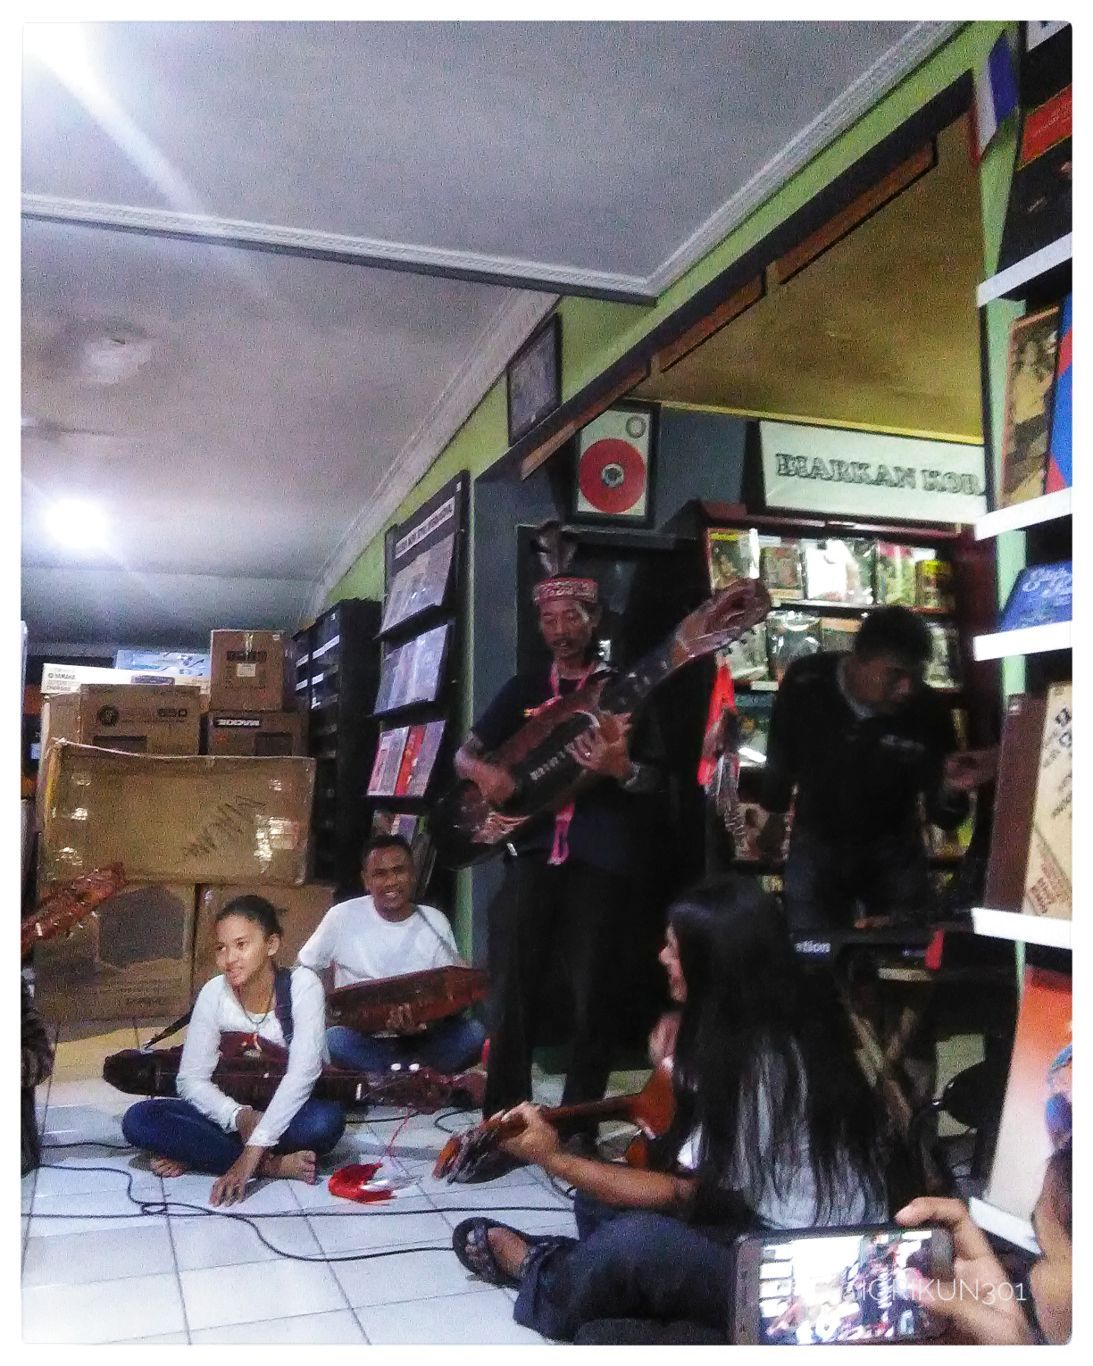 M2i Dawai's musical performance using Sapek, an ethnic musical instrument from Borneo